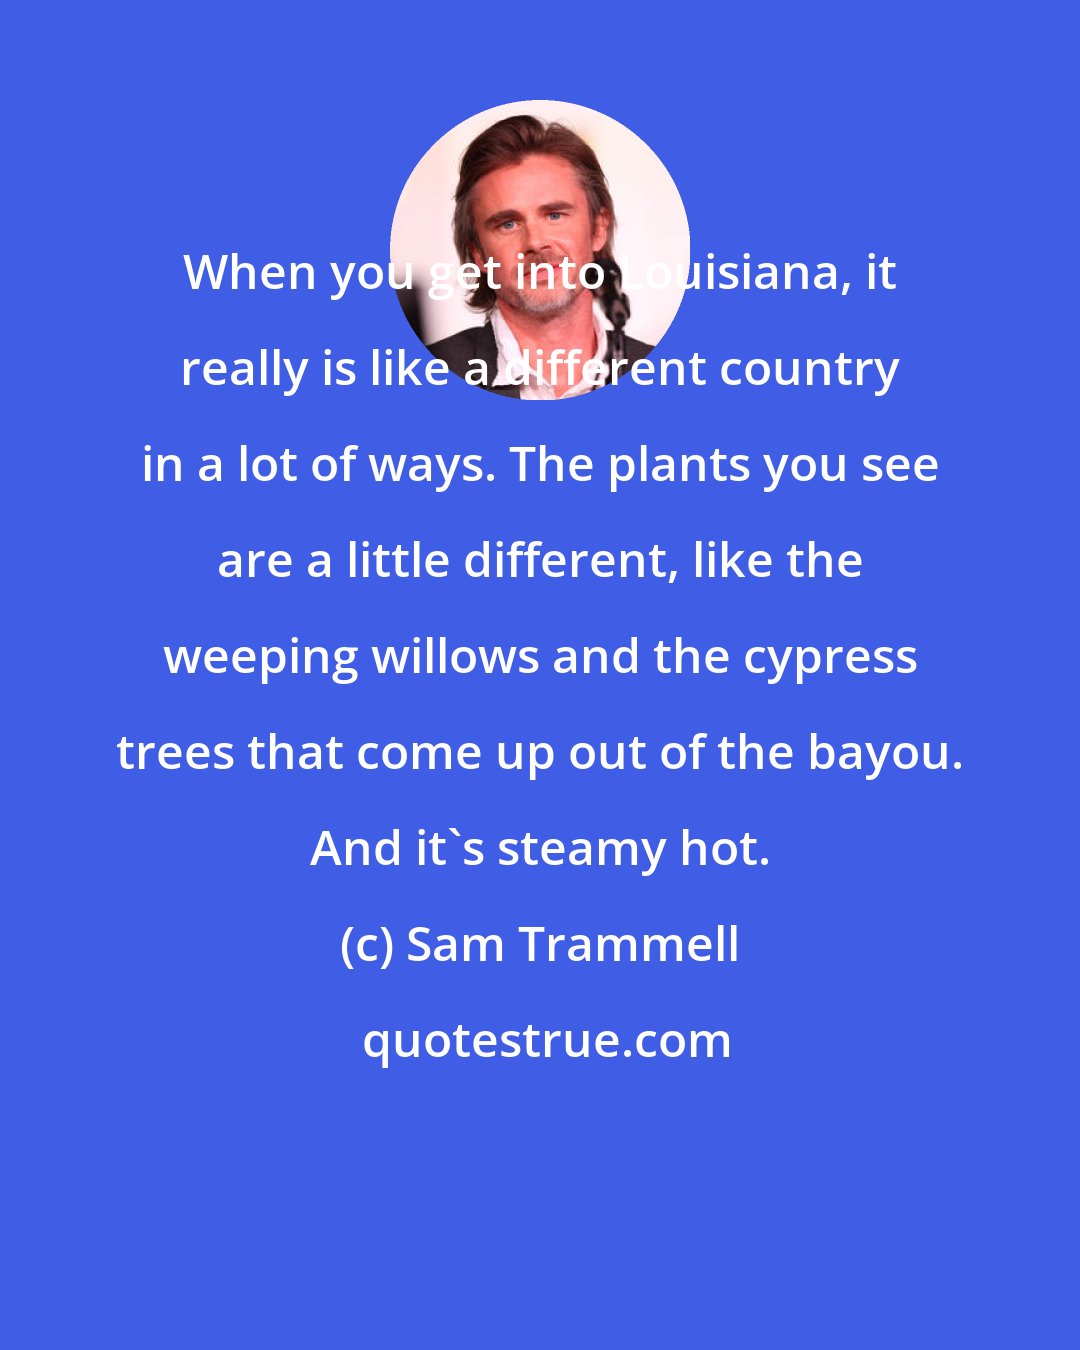 Sam Trammell: When you get into Louisiana, it really is like a different country in a lot of ways. The plants you see are a little different, like the weeping willows and the cypress trees that come up out of the bayou. And it's steamy hot.